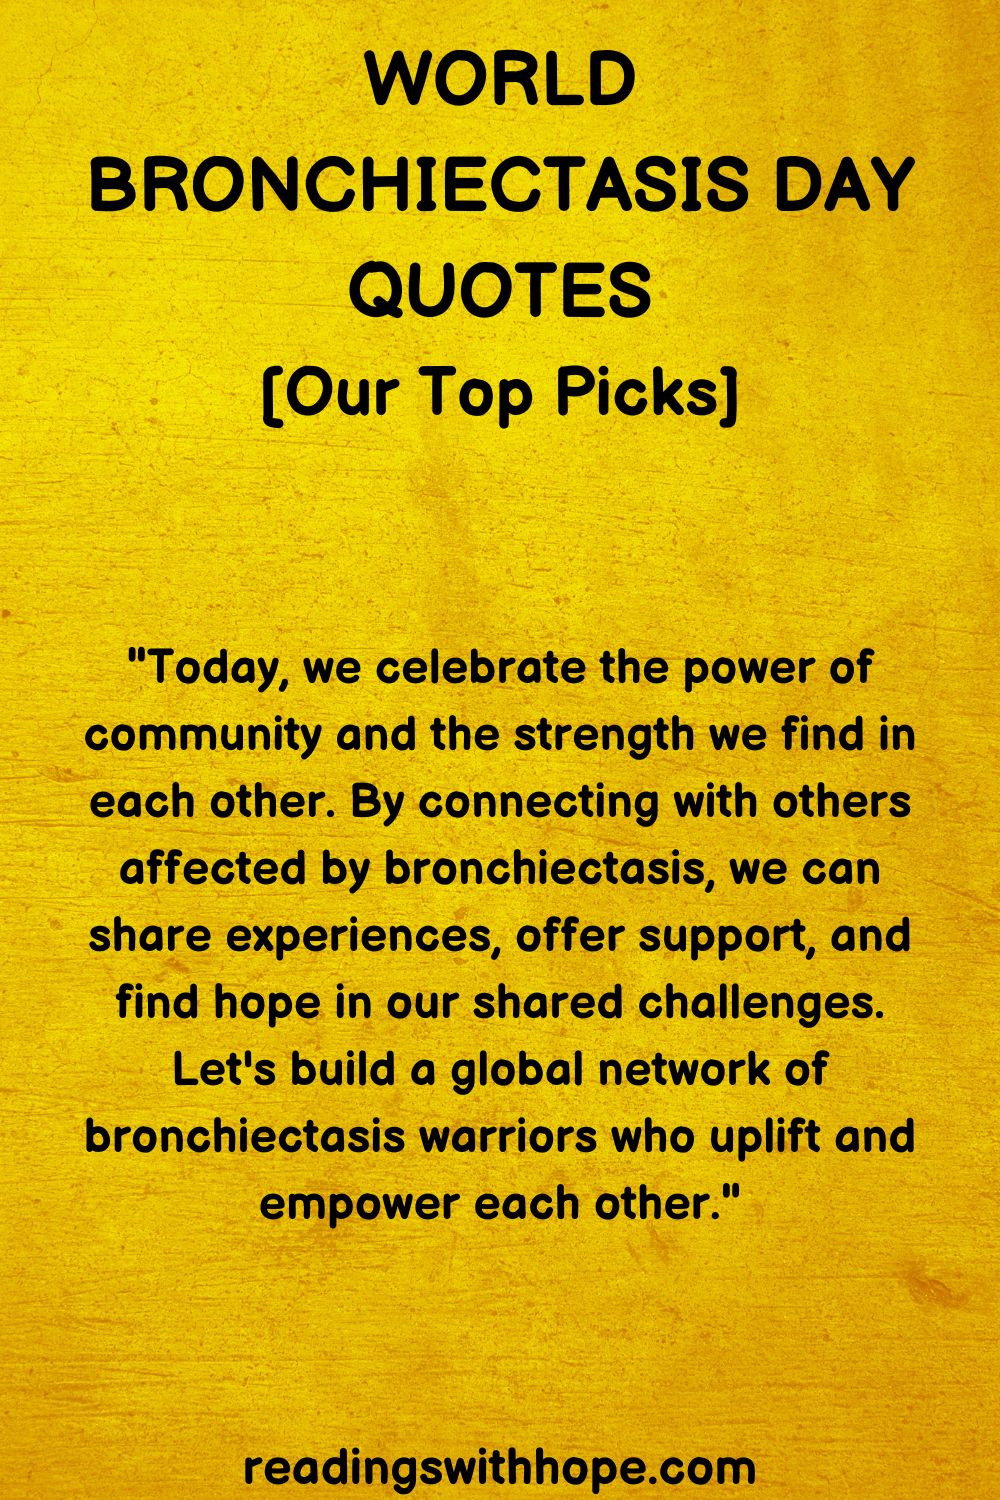 World Bronchiectasis Day Quotes